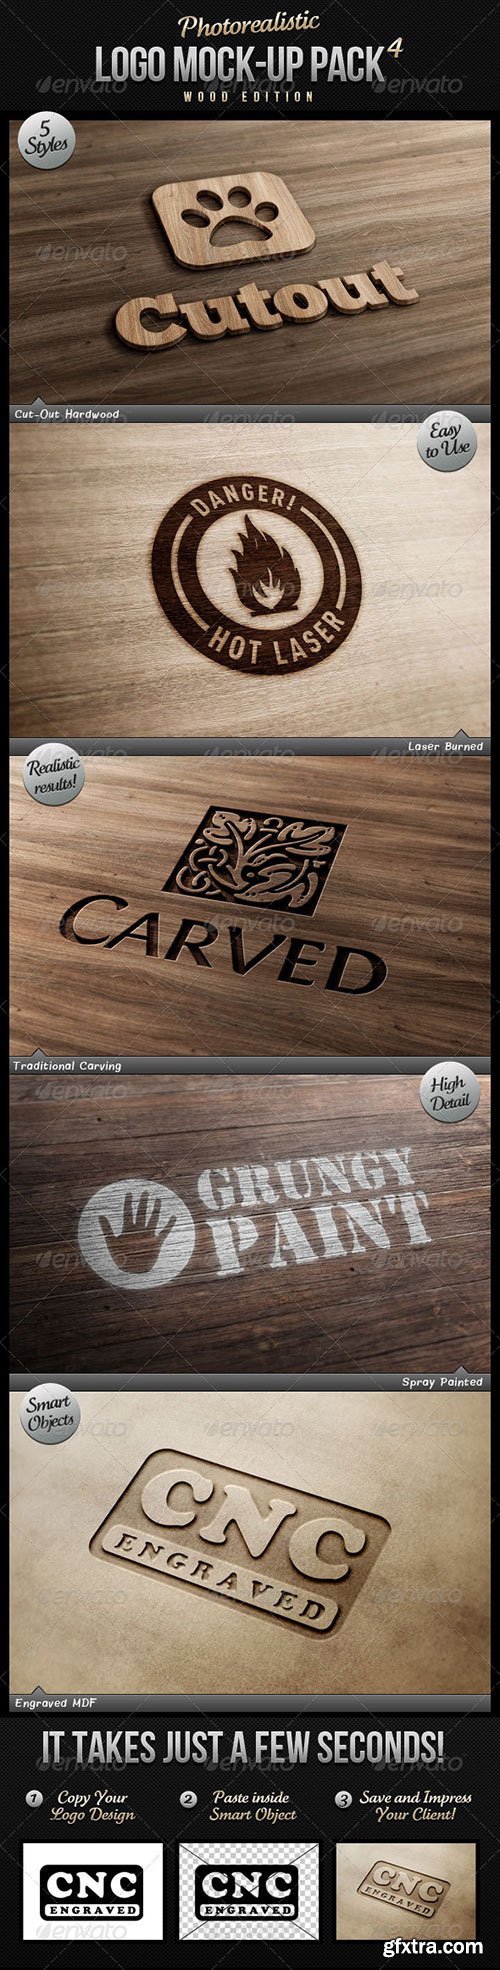 GraphicRiver - Photorealistic Logo Mock-Up Pack 4 - Wood Edition